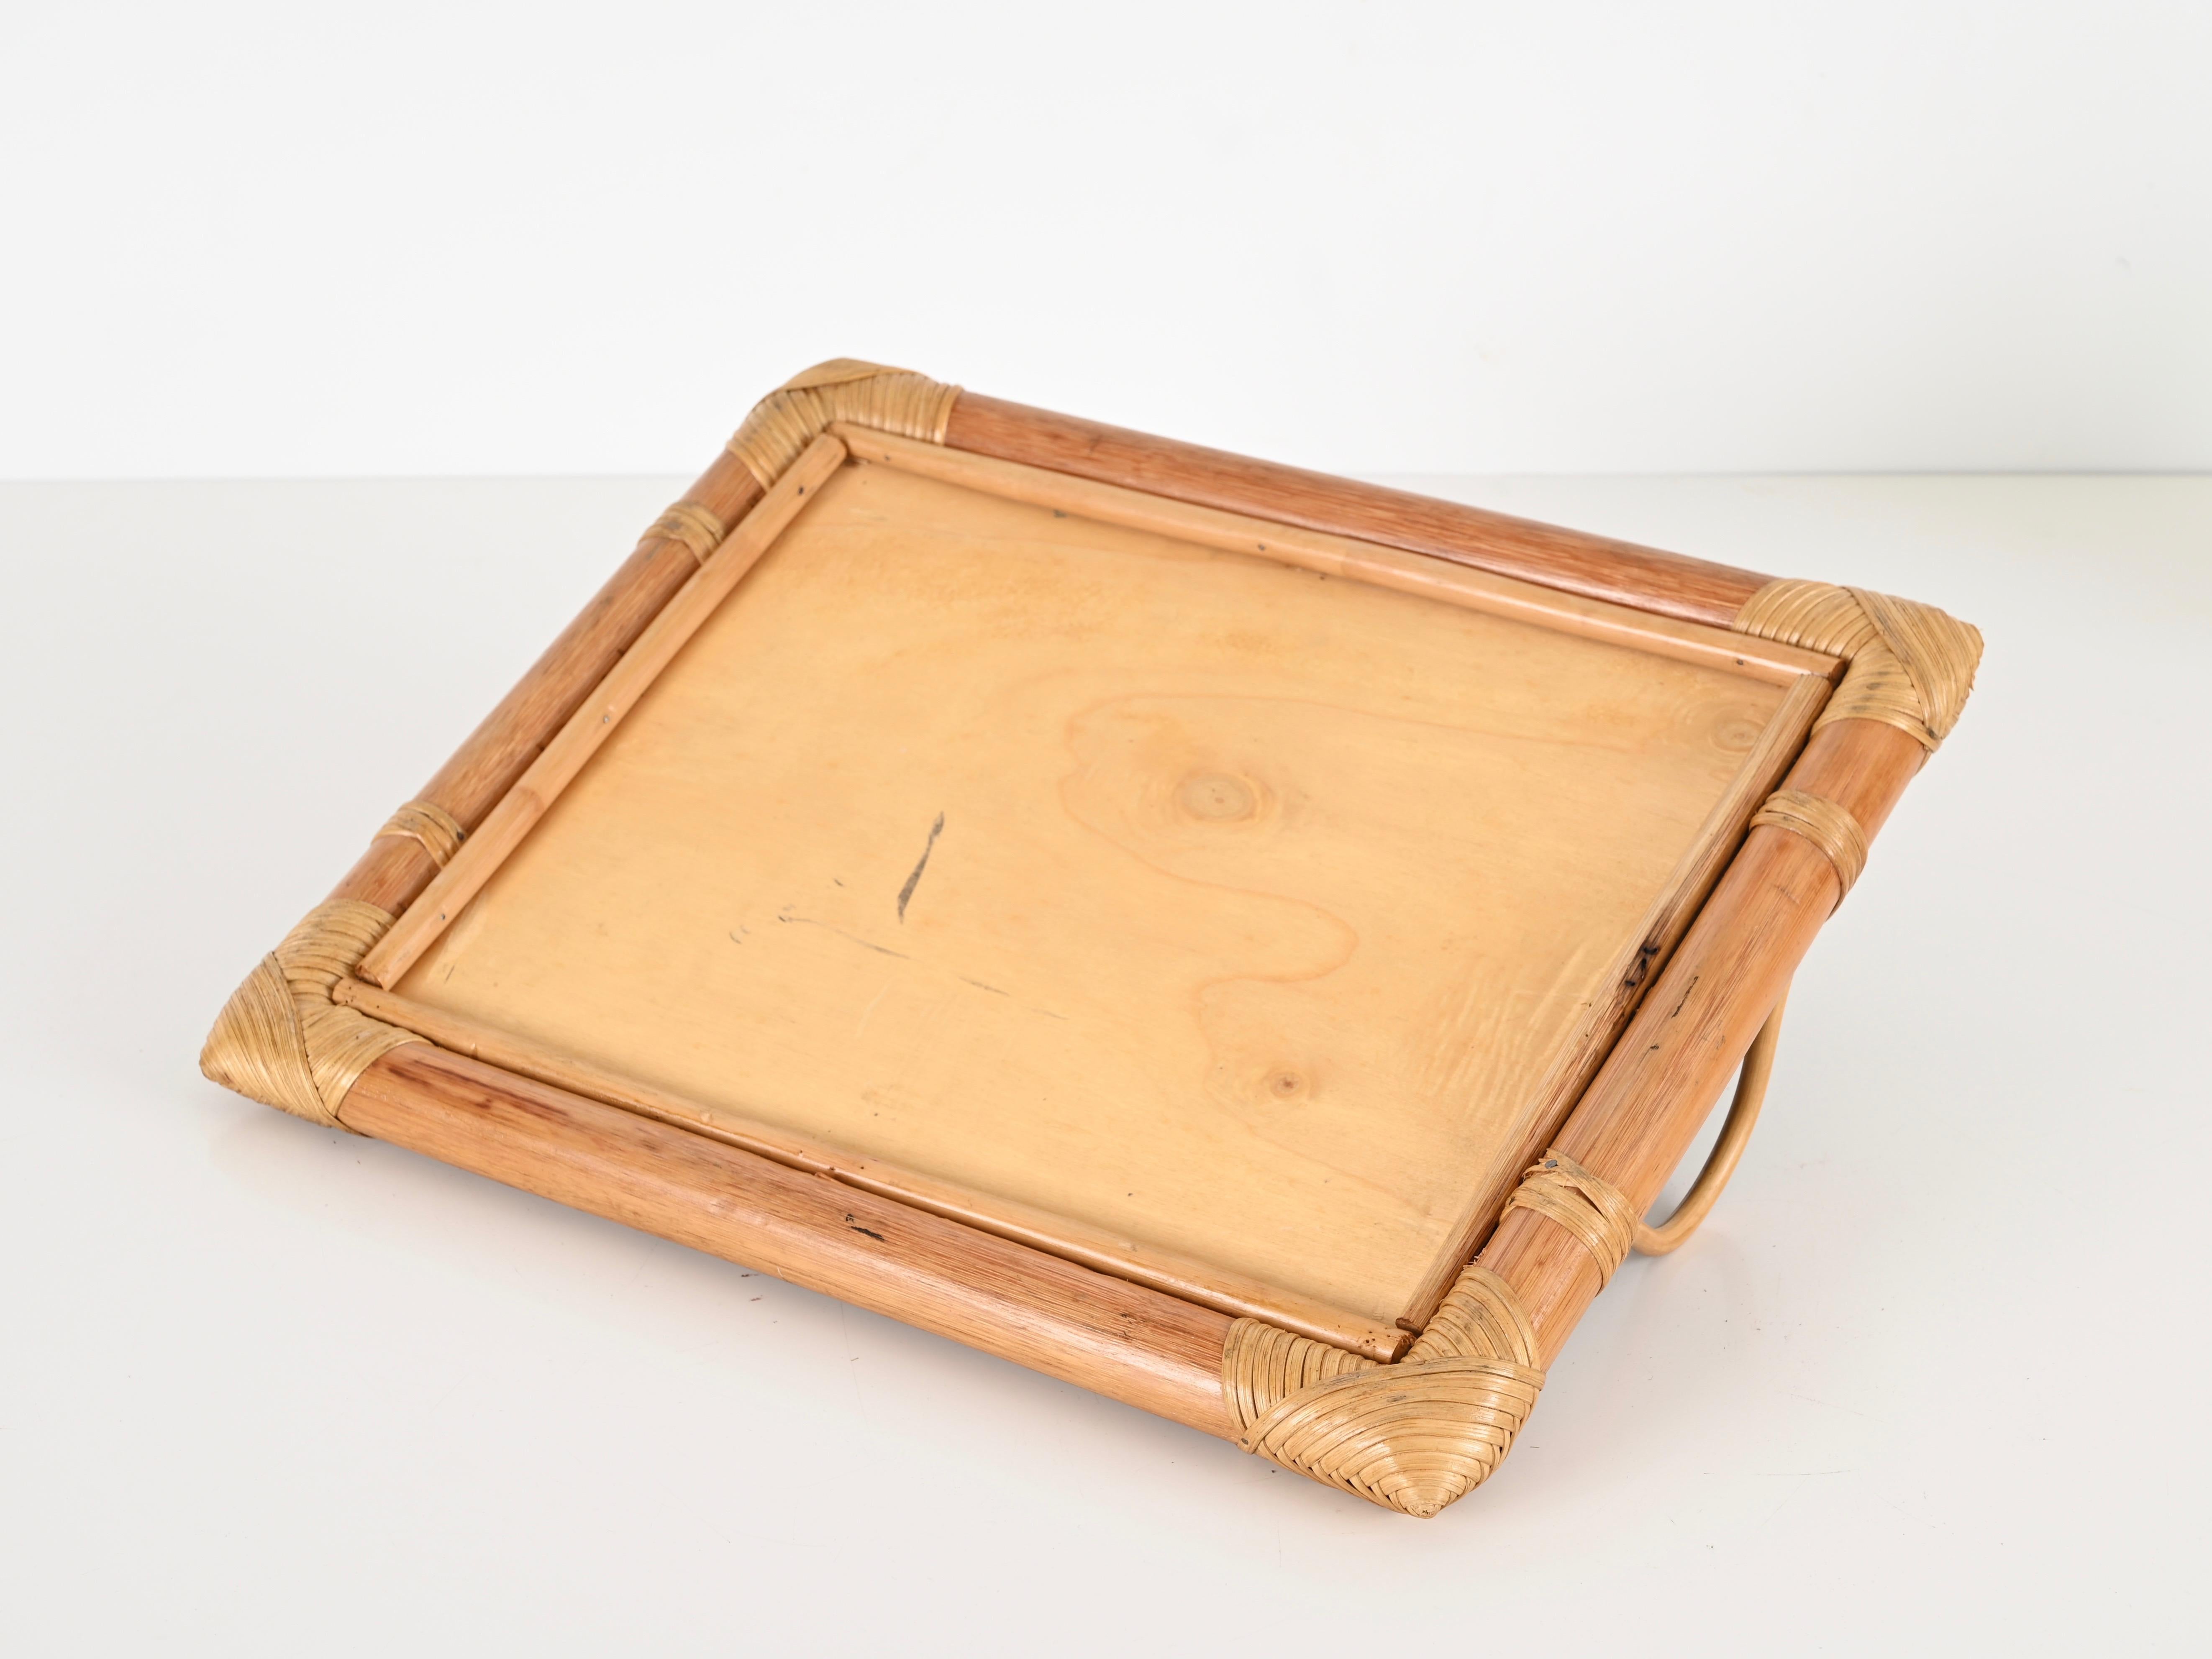 French Riviera Serving Tray in Bamboo and Rattan W/ Green Interior, Italy 1970s For Sale 5